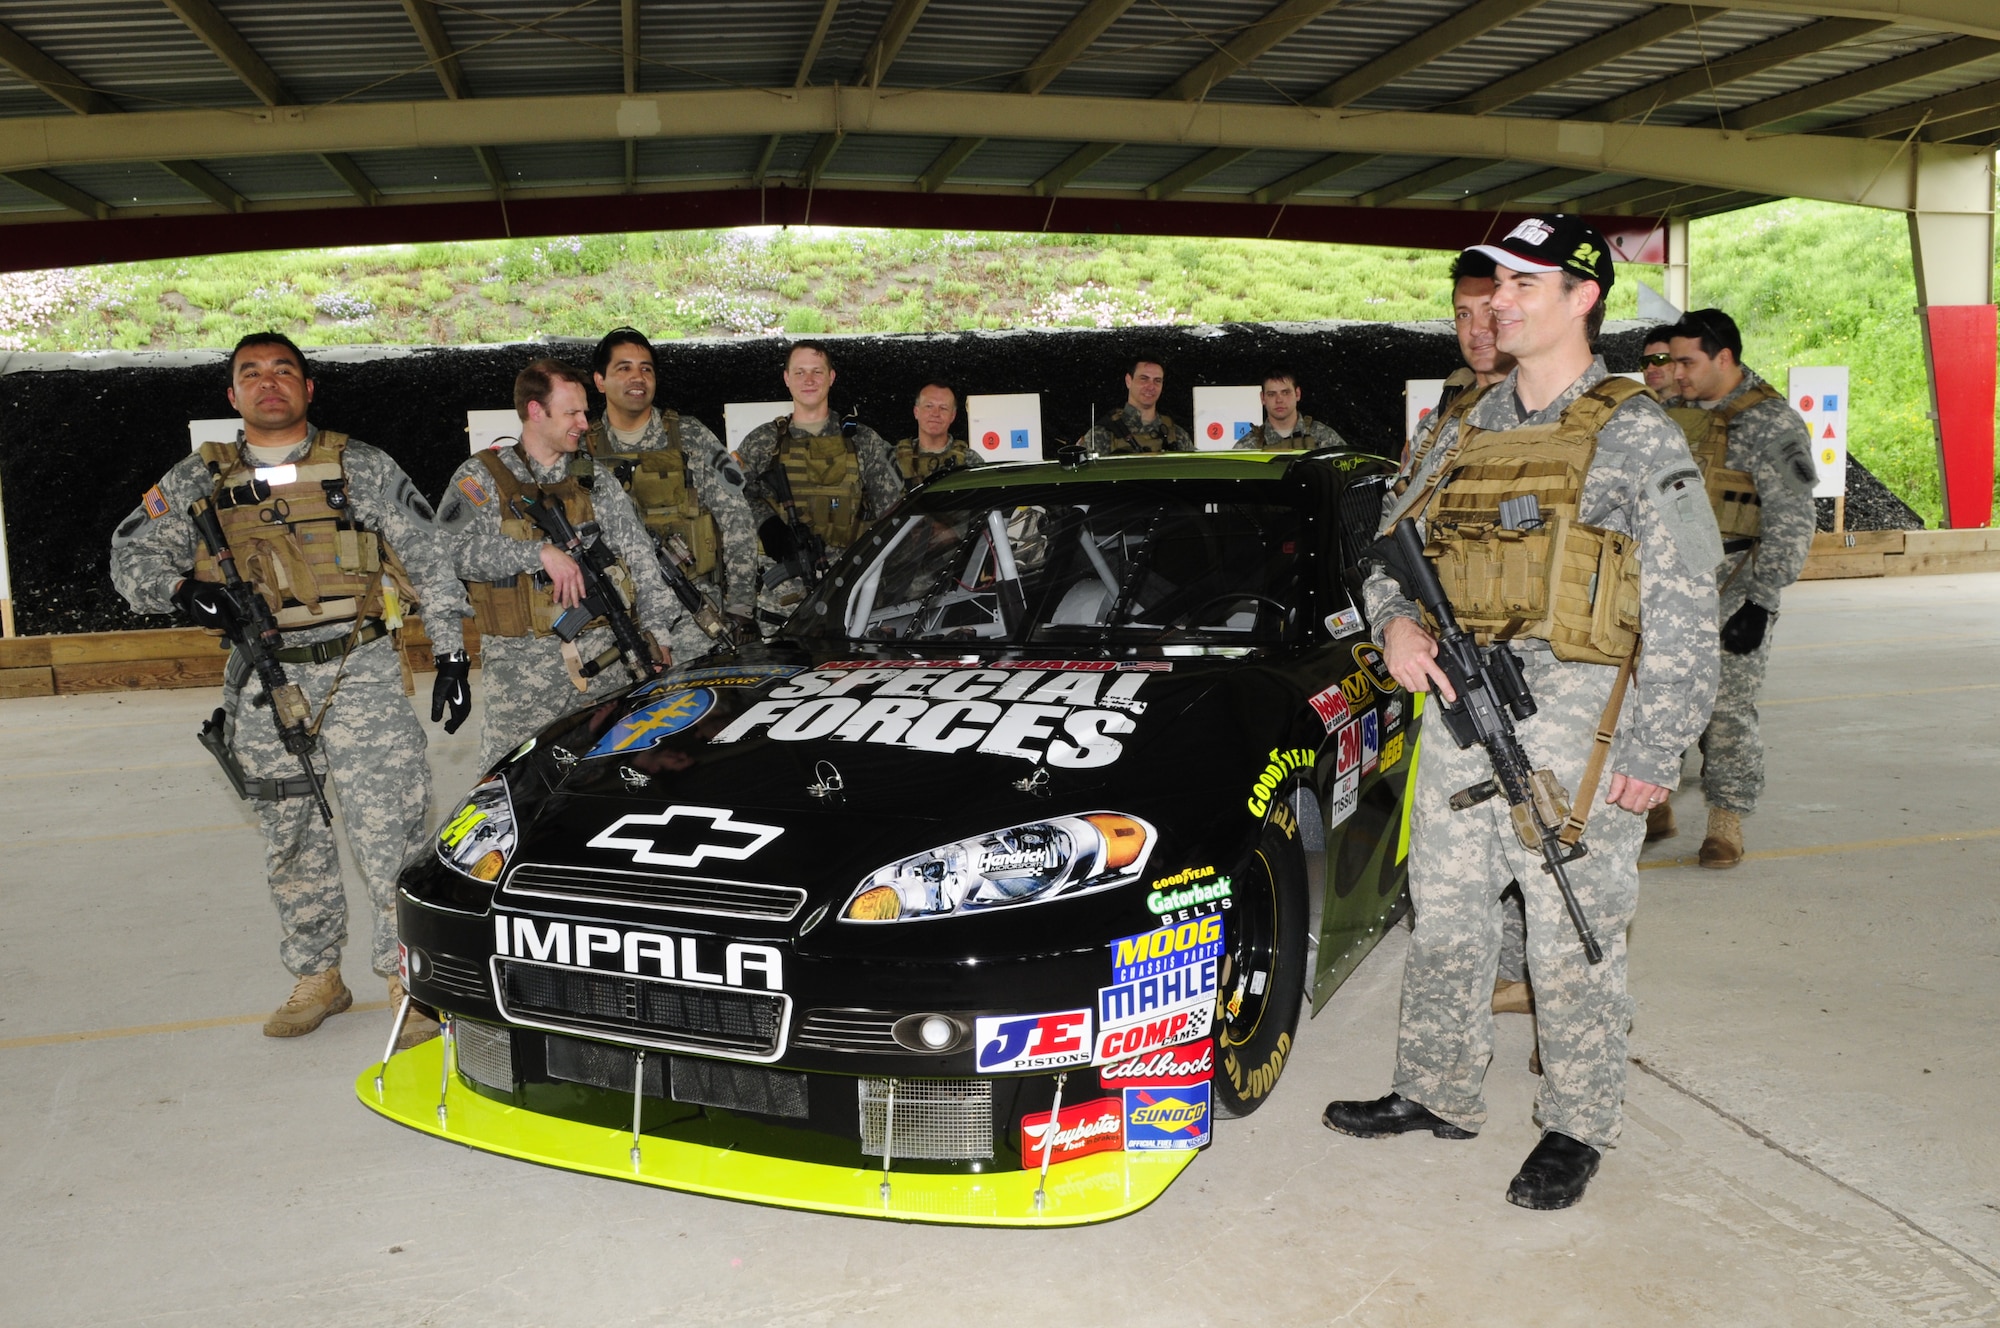 Suited up with Army National Guard equipment and uniform (except for cap and boots), NASCAR driver Jeff Gordon joins National Guard Security Forces Soldiers with his #24 car sporting a new paint scheme and graphics honoring the elite Soldiers, in Texas, on April 15, 2010. (U.S. Air Force photo by Senior Master Sgt. Mike Arellano/Released)